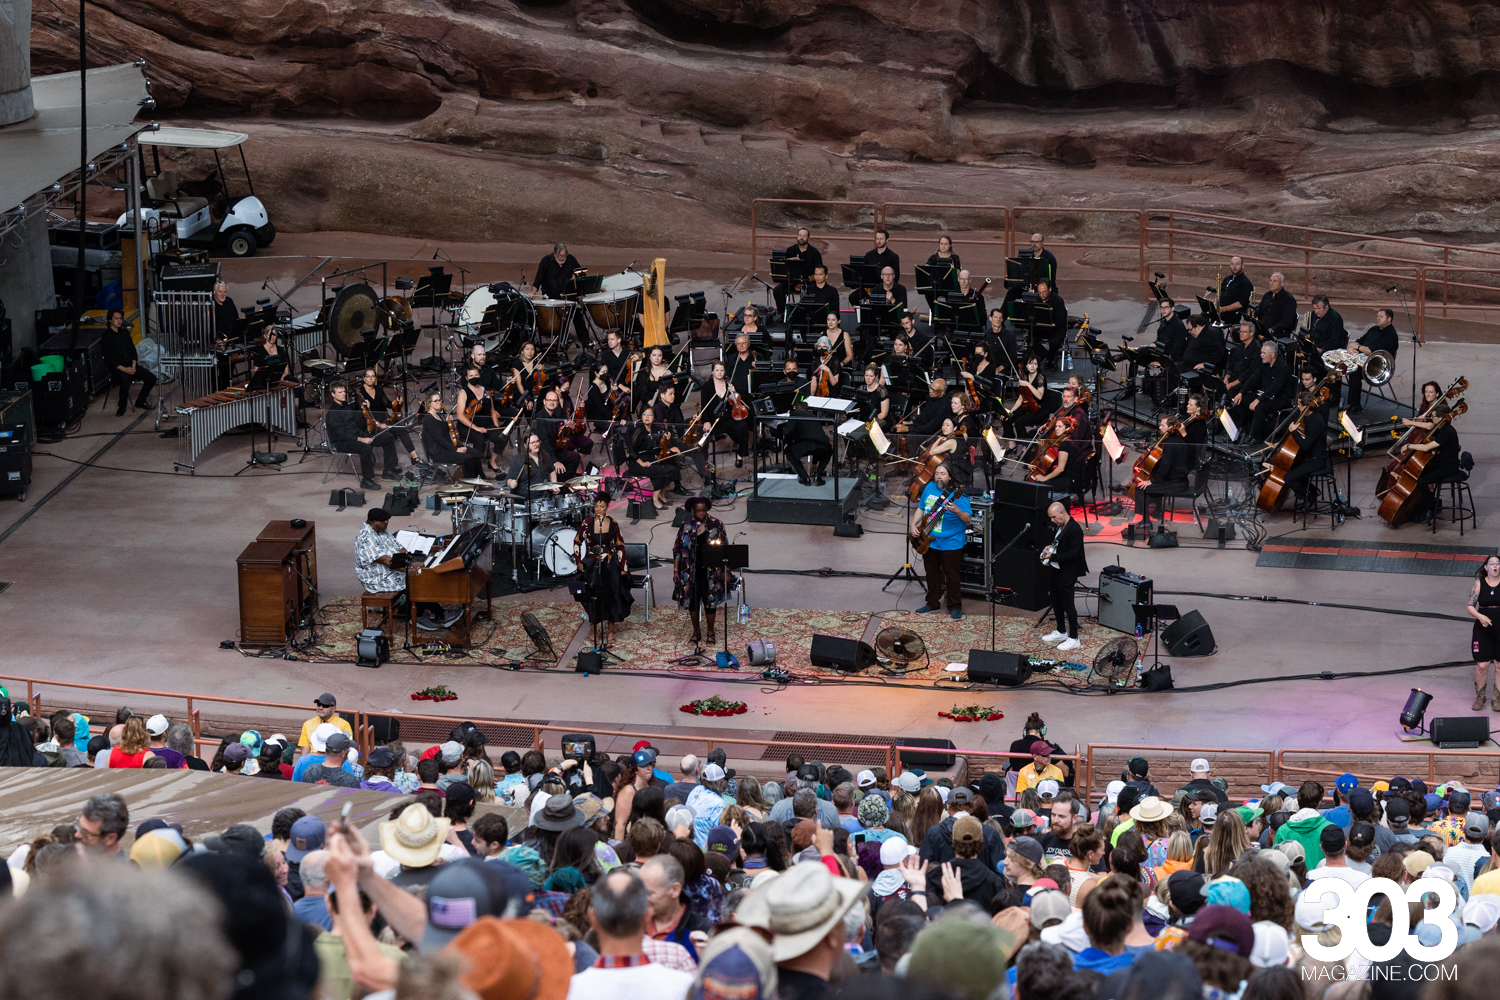 Jerry Garcia's 80th Birthday Celebration with Colorado Symphony Orchestra at Red Rocks